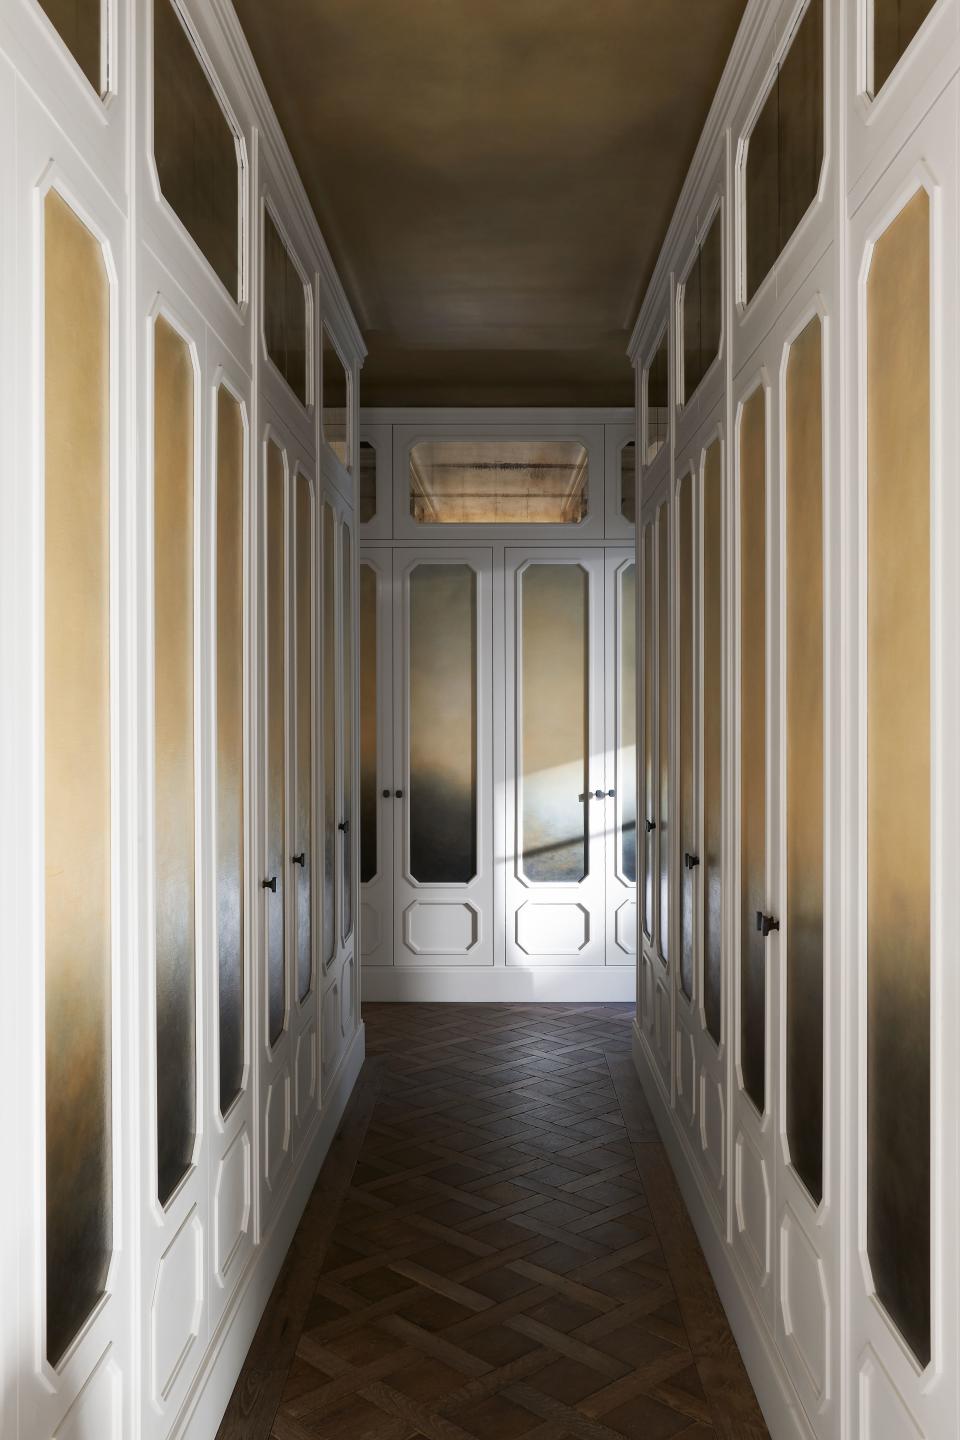 Mirrored and painted panels line a hallway.